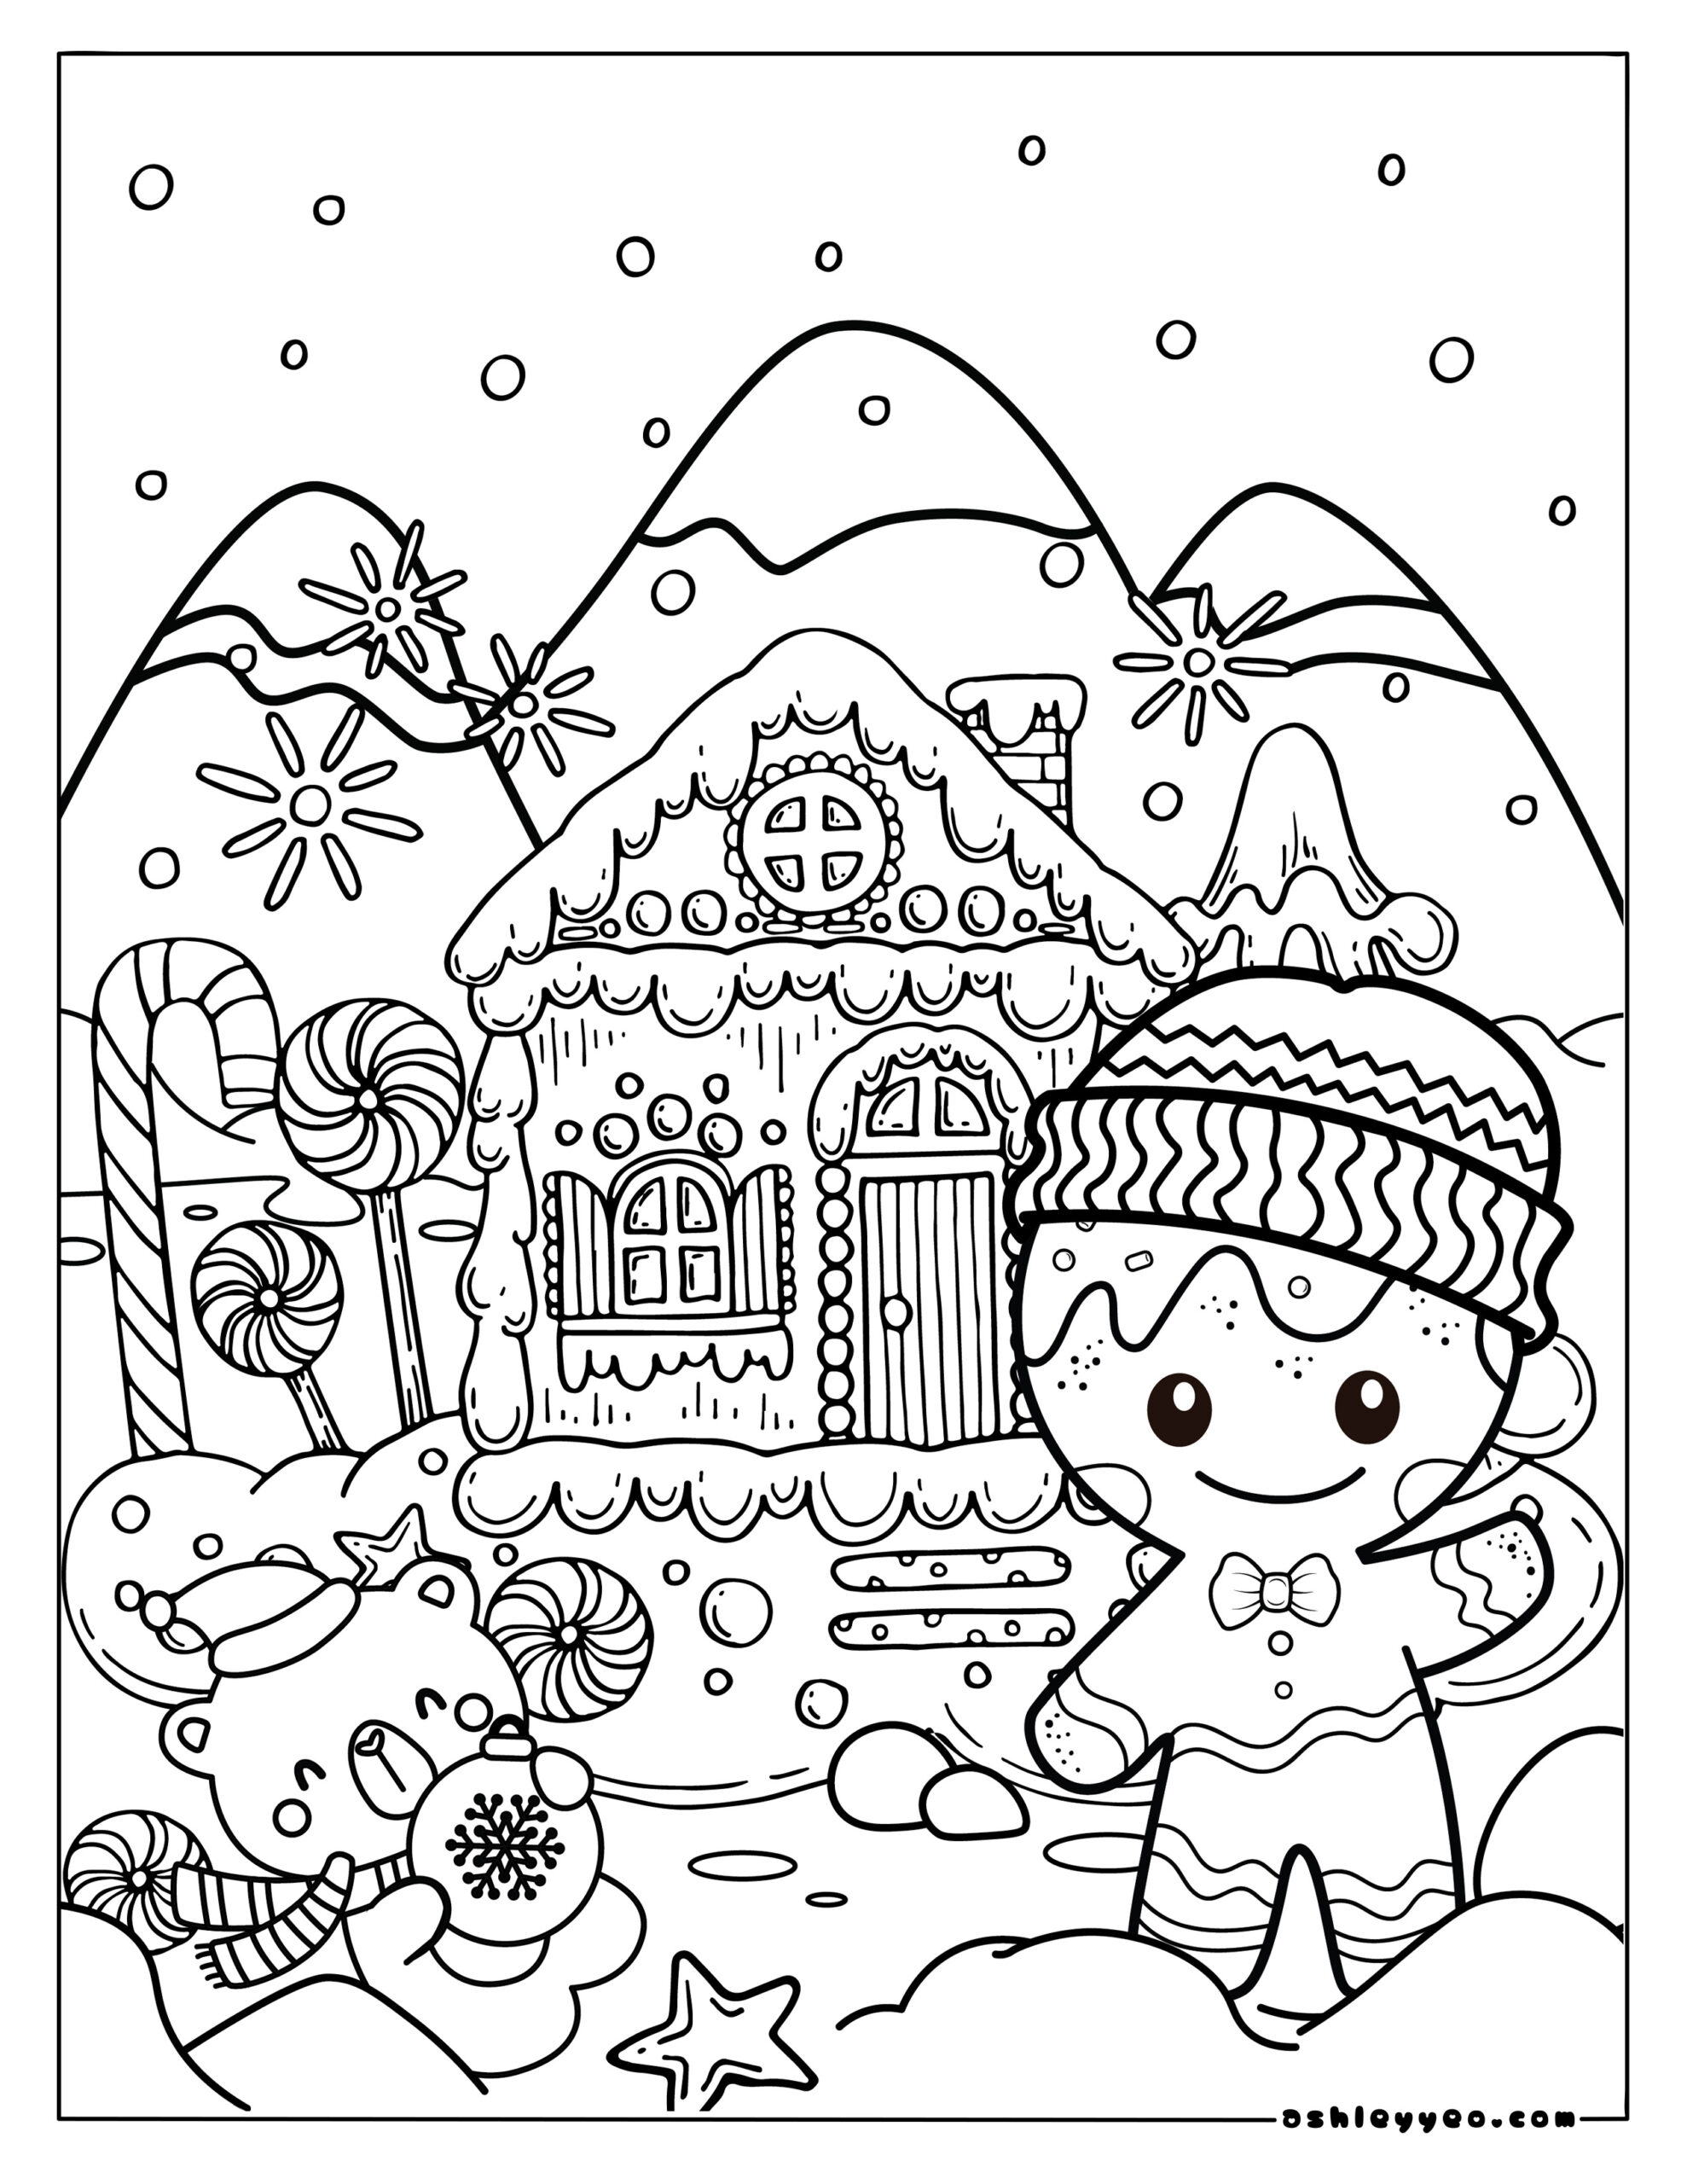 Large Print Easy Winter Adult Coloring Book: 50 Easy & Simple Winter  Coloring Pages for Adults and Seniors for Calming, Stress Relief  (Paperback)